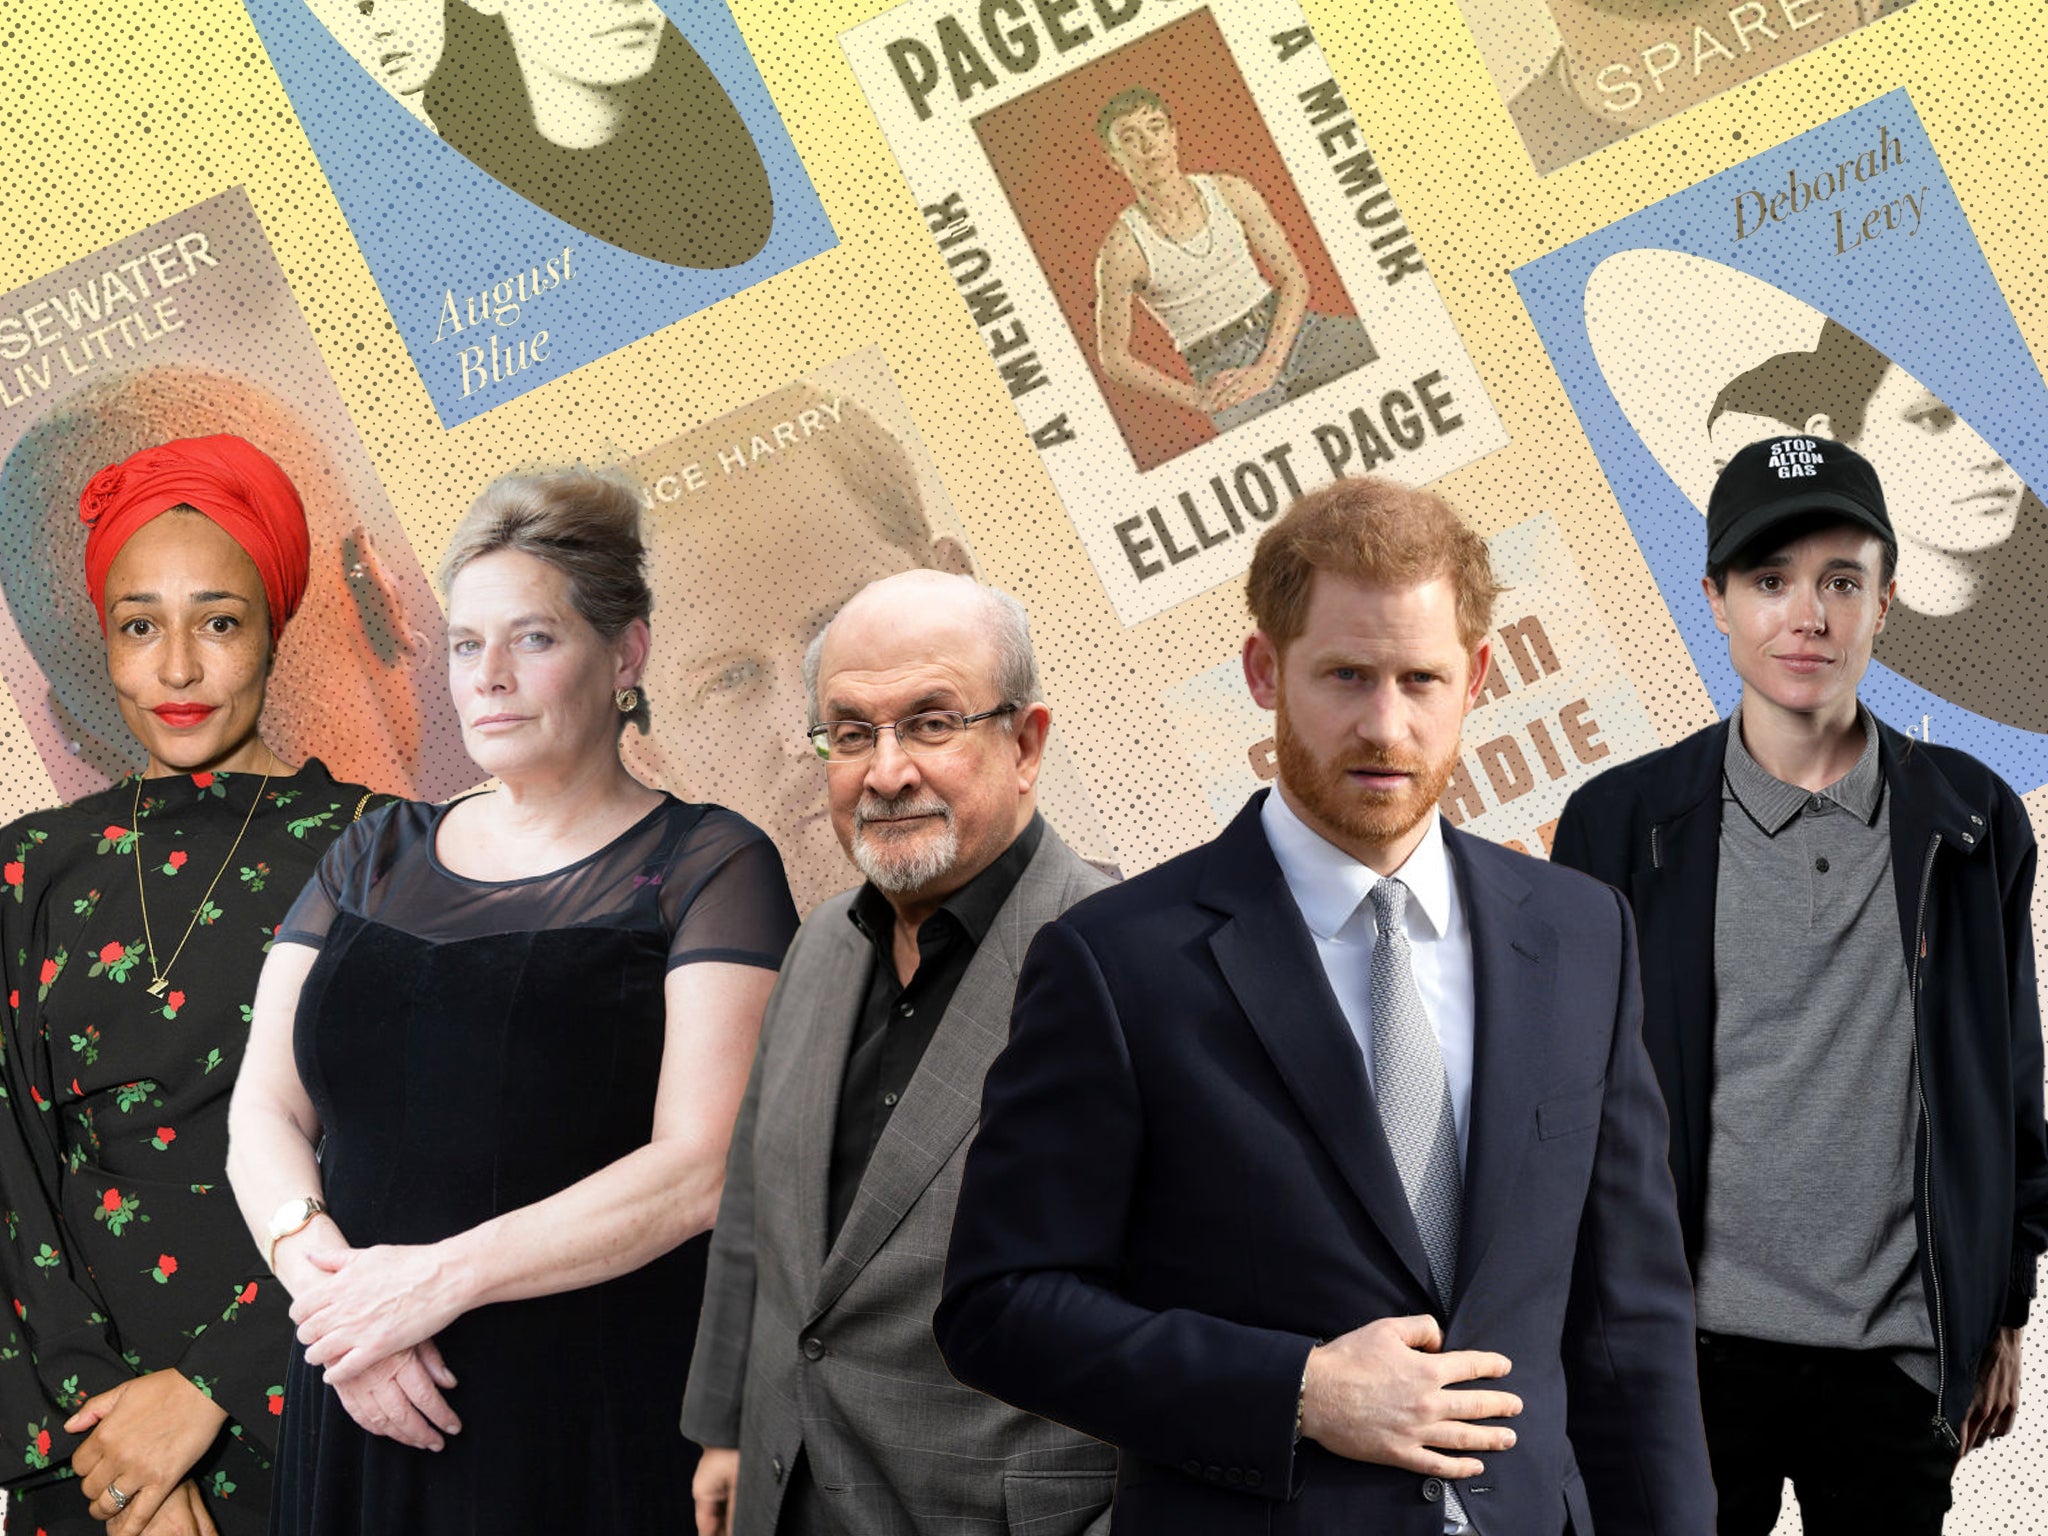 Zadie Smith, Deborah Levy, Salman Rushdie, Prince Harry and Elliot Page will all release books in 2023